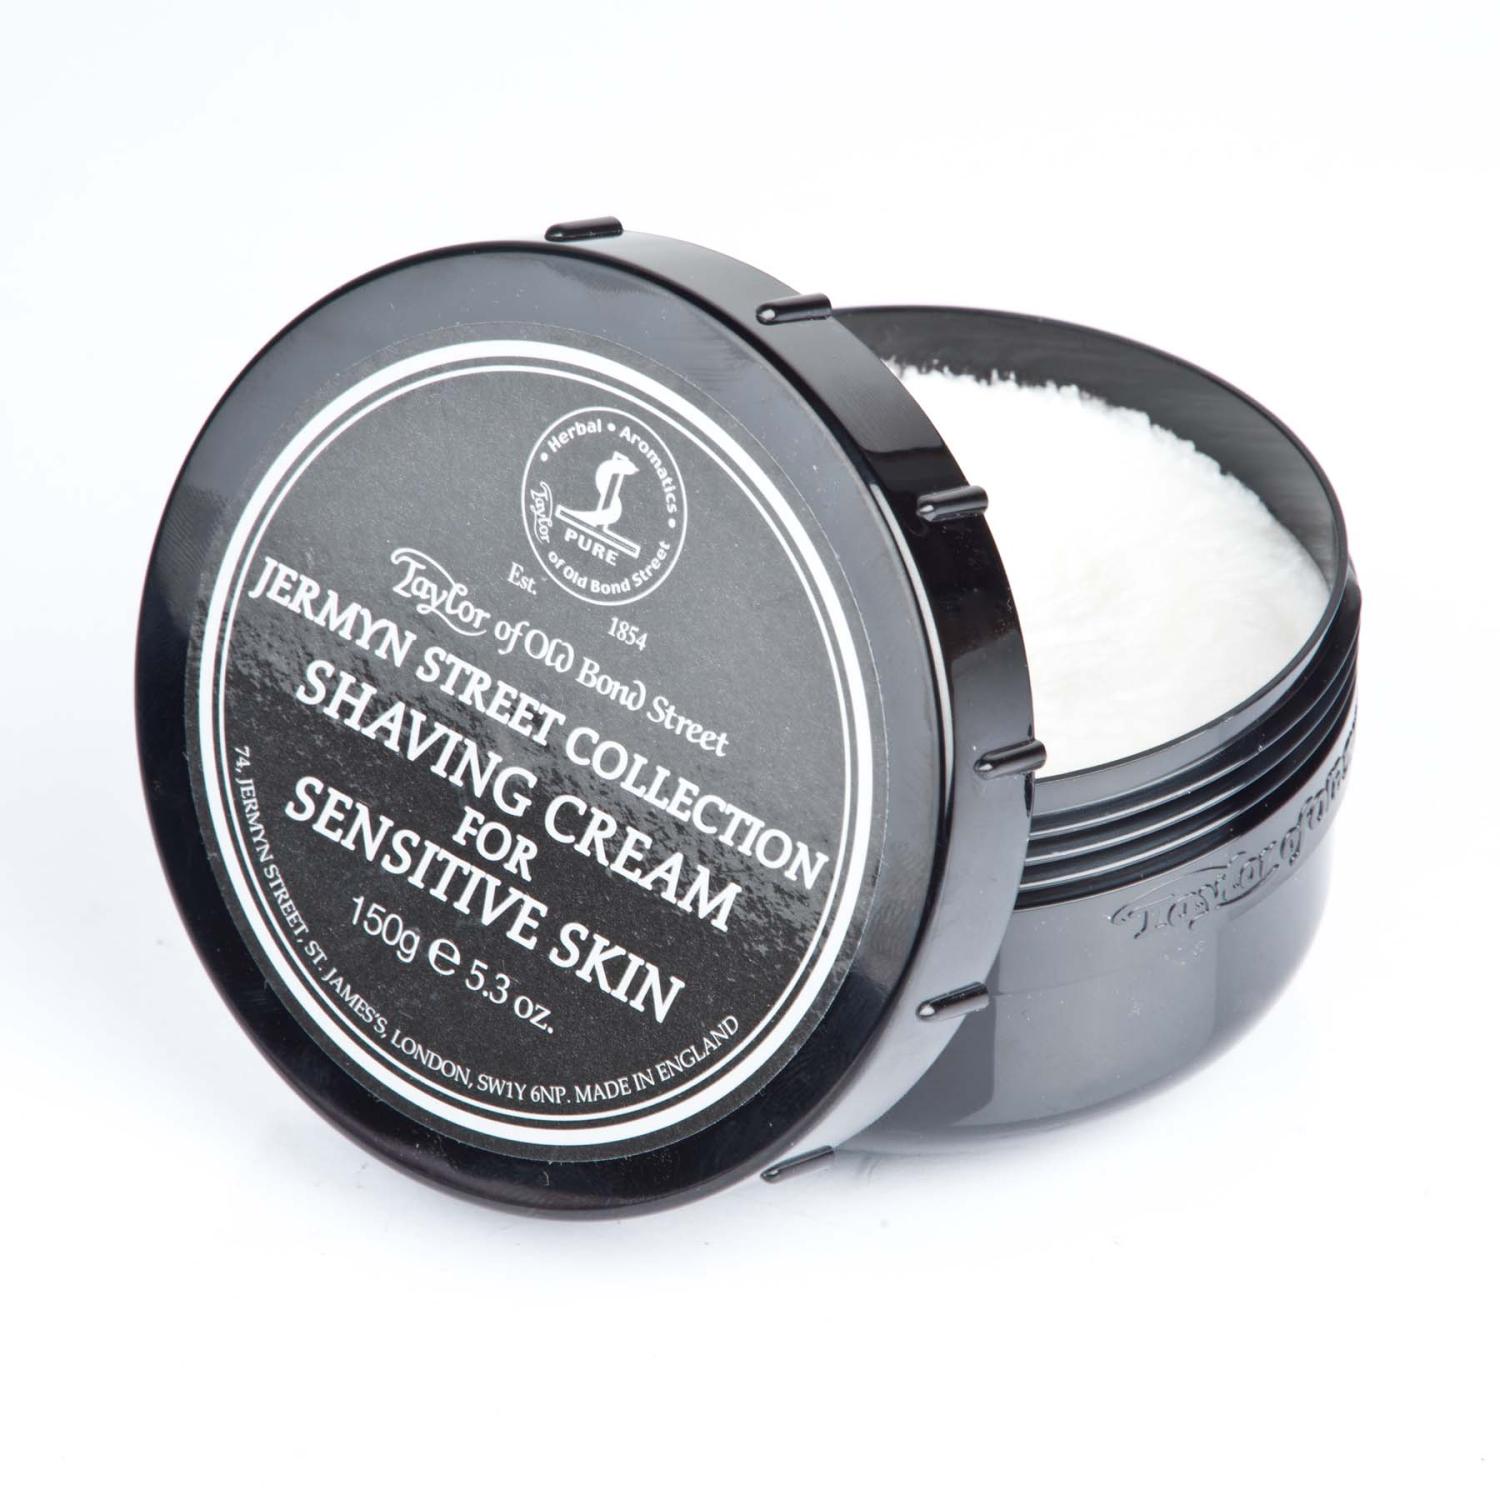 Cream Collection St luxury Shaving Taylor James